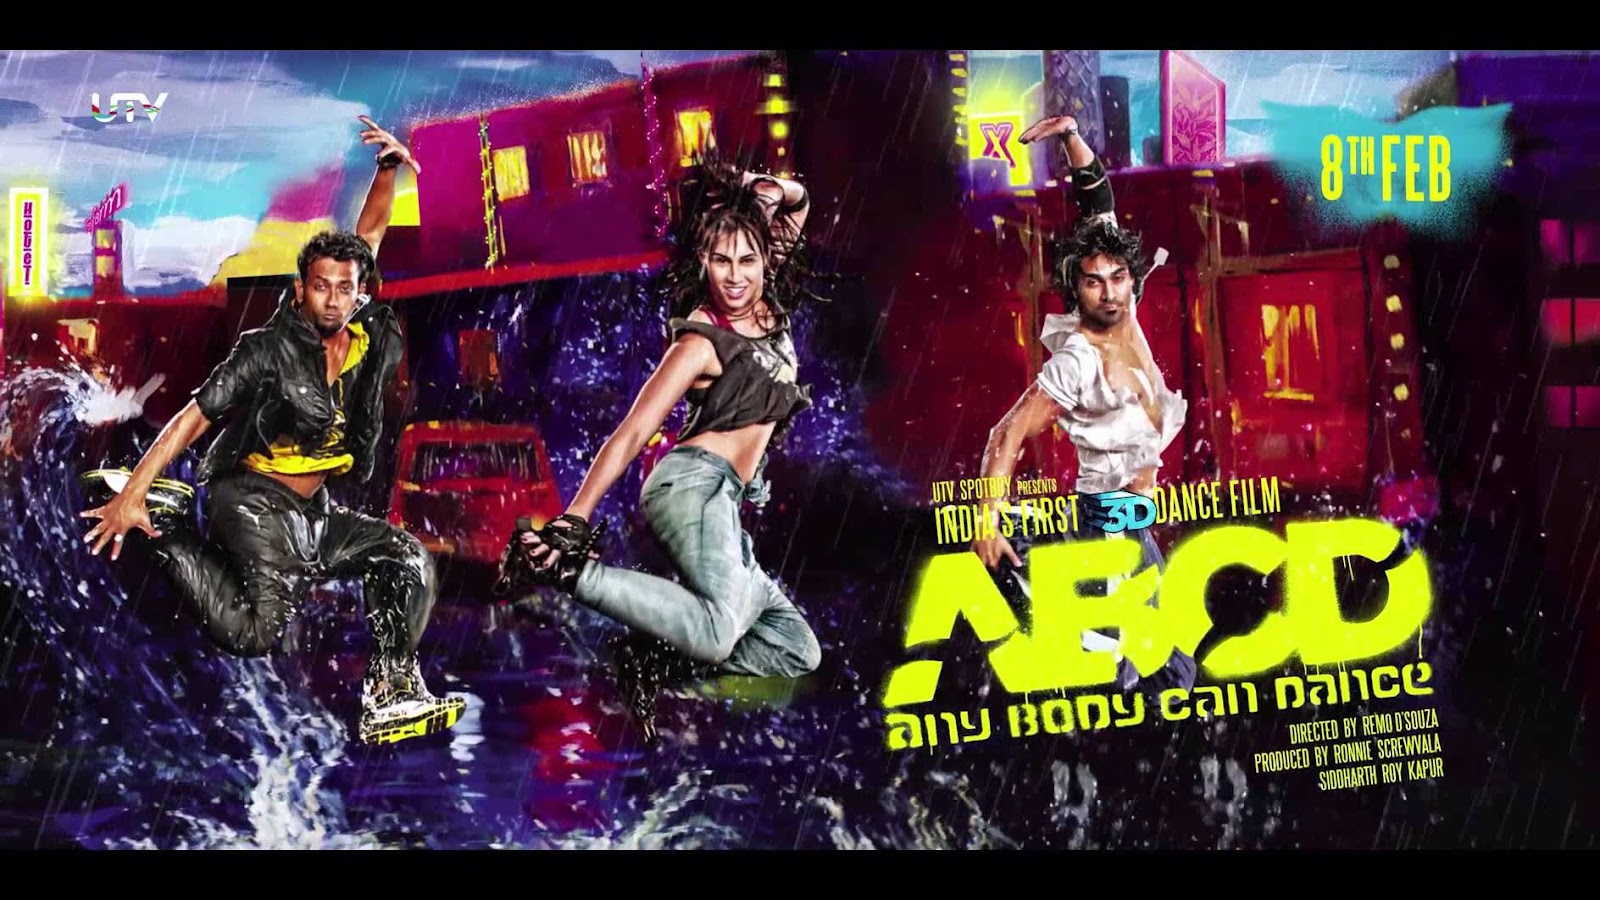 ABCD - Any Body Can Dance - 2 full hindi movie free